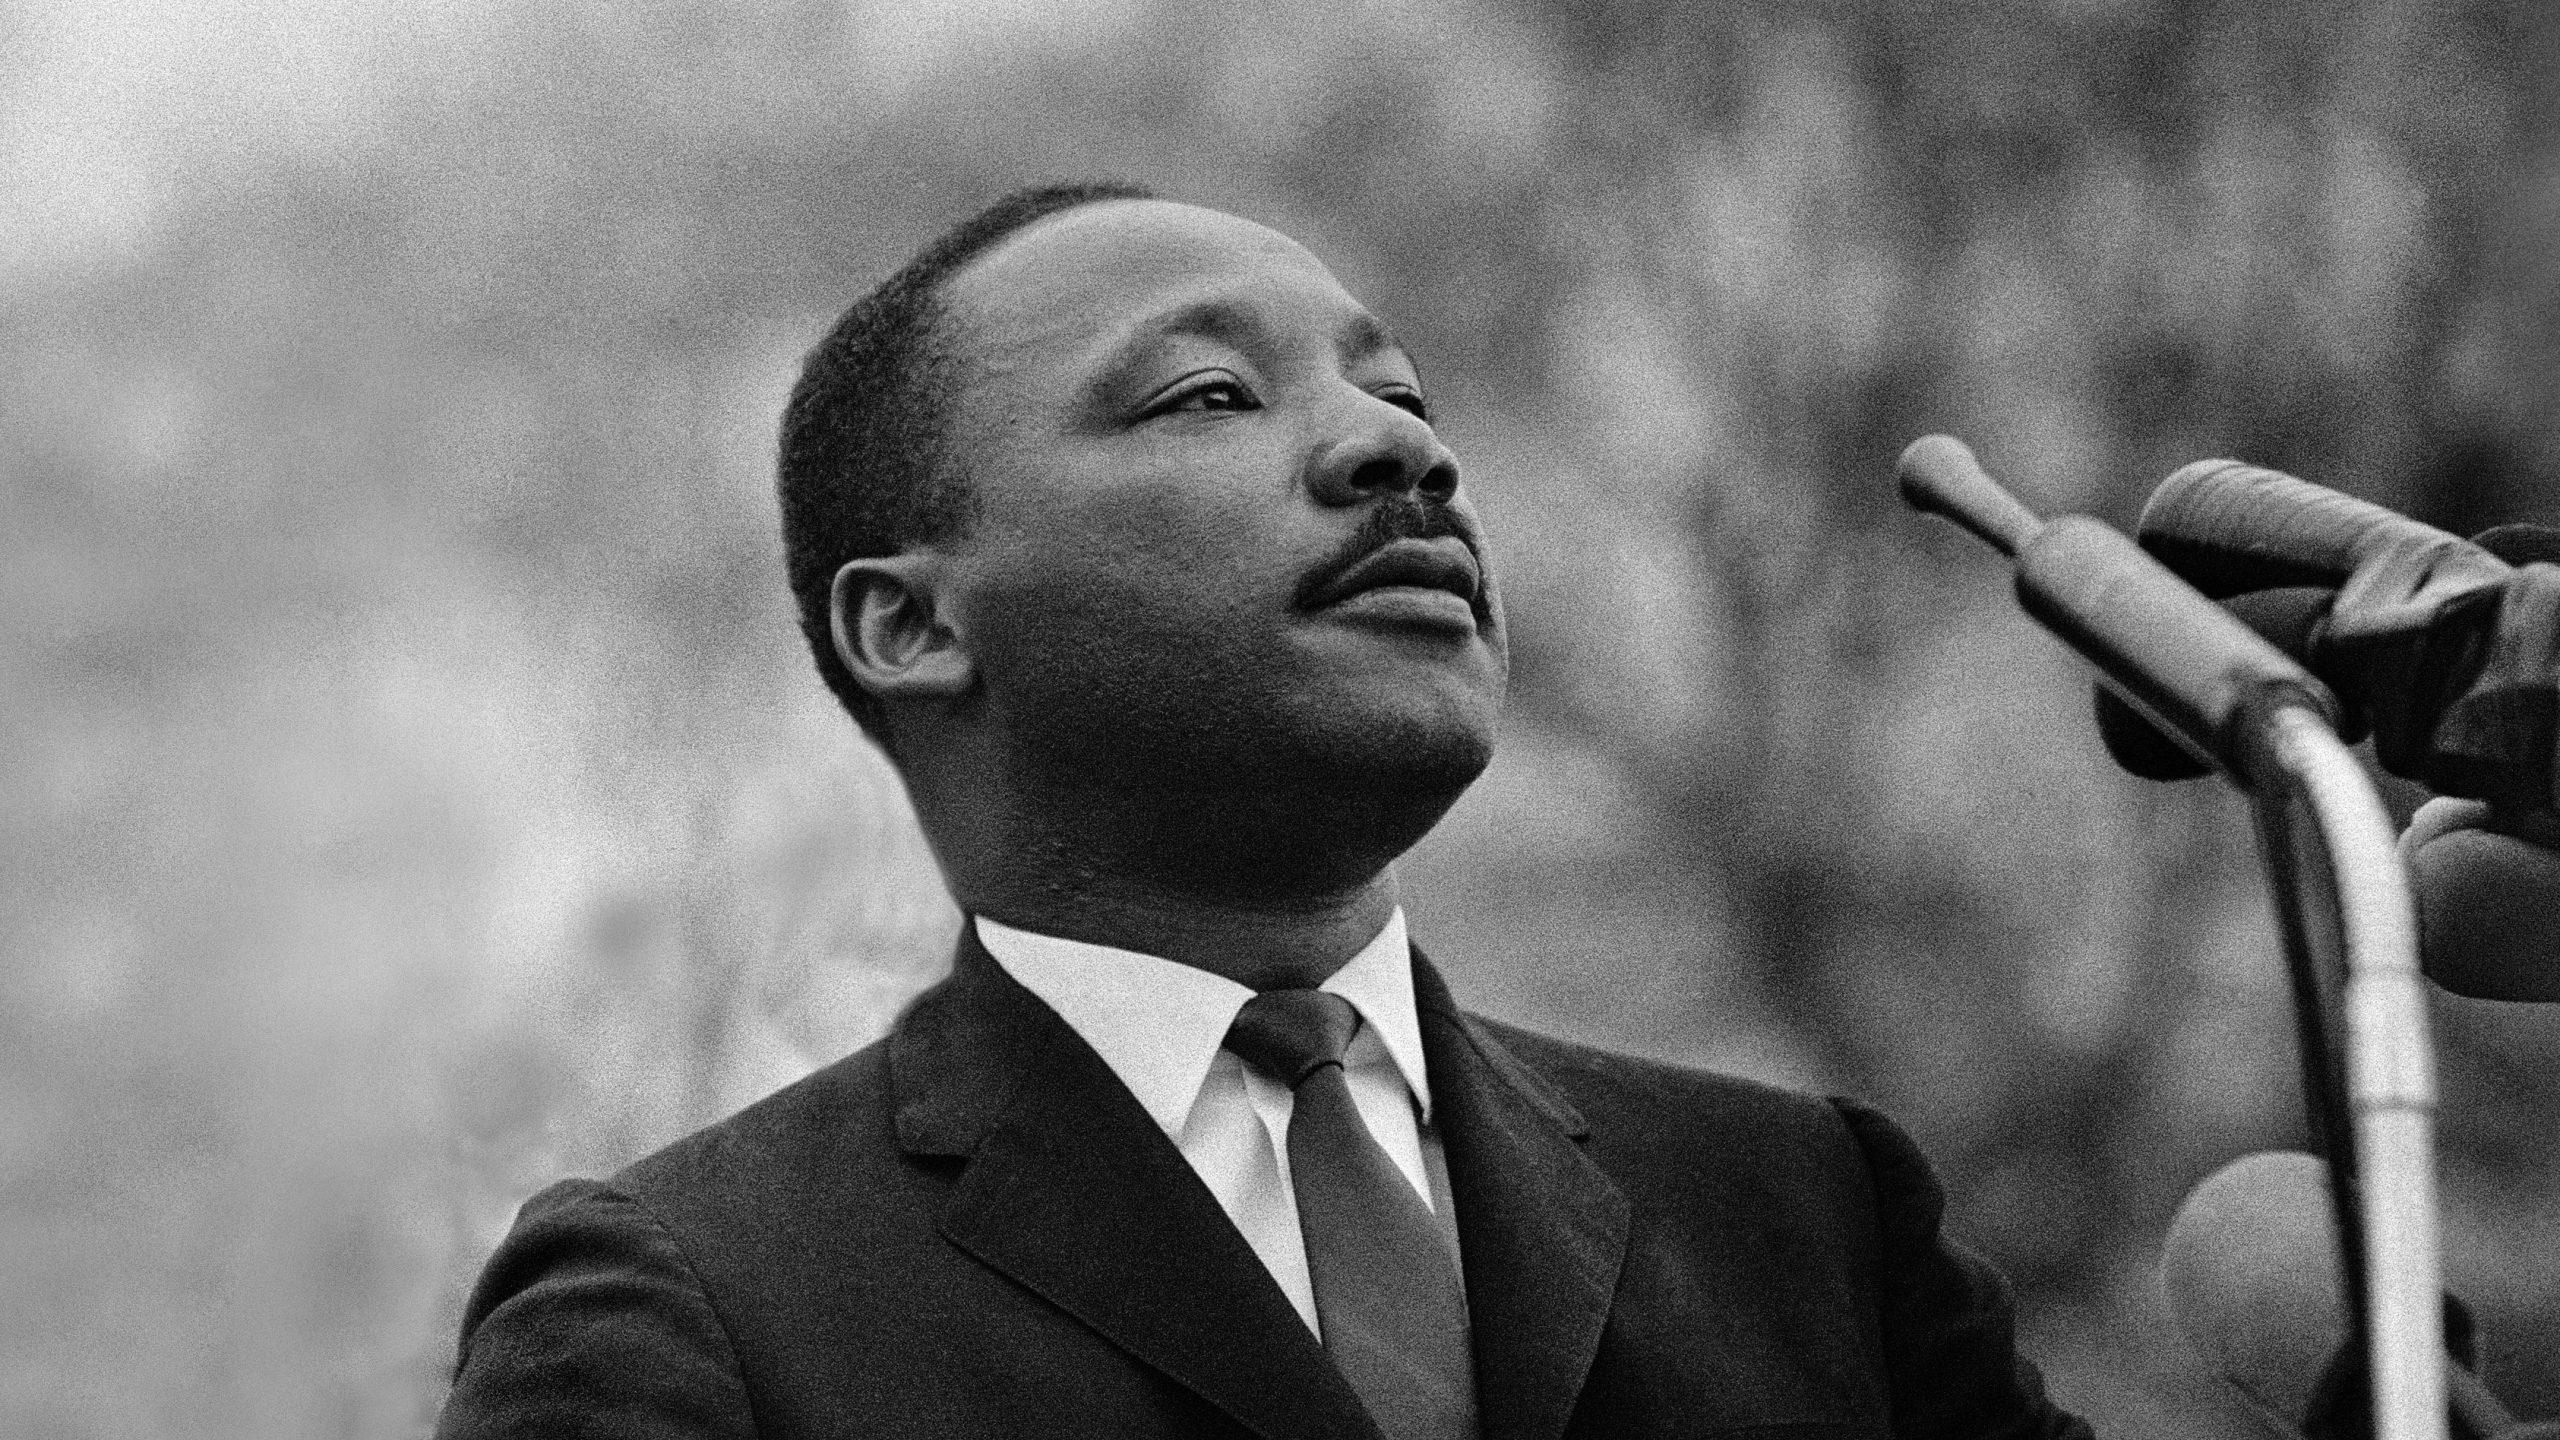 How Old Was Martin Luther King When He Died?